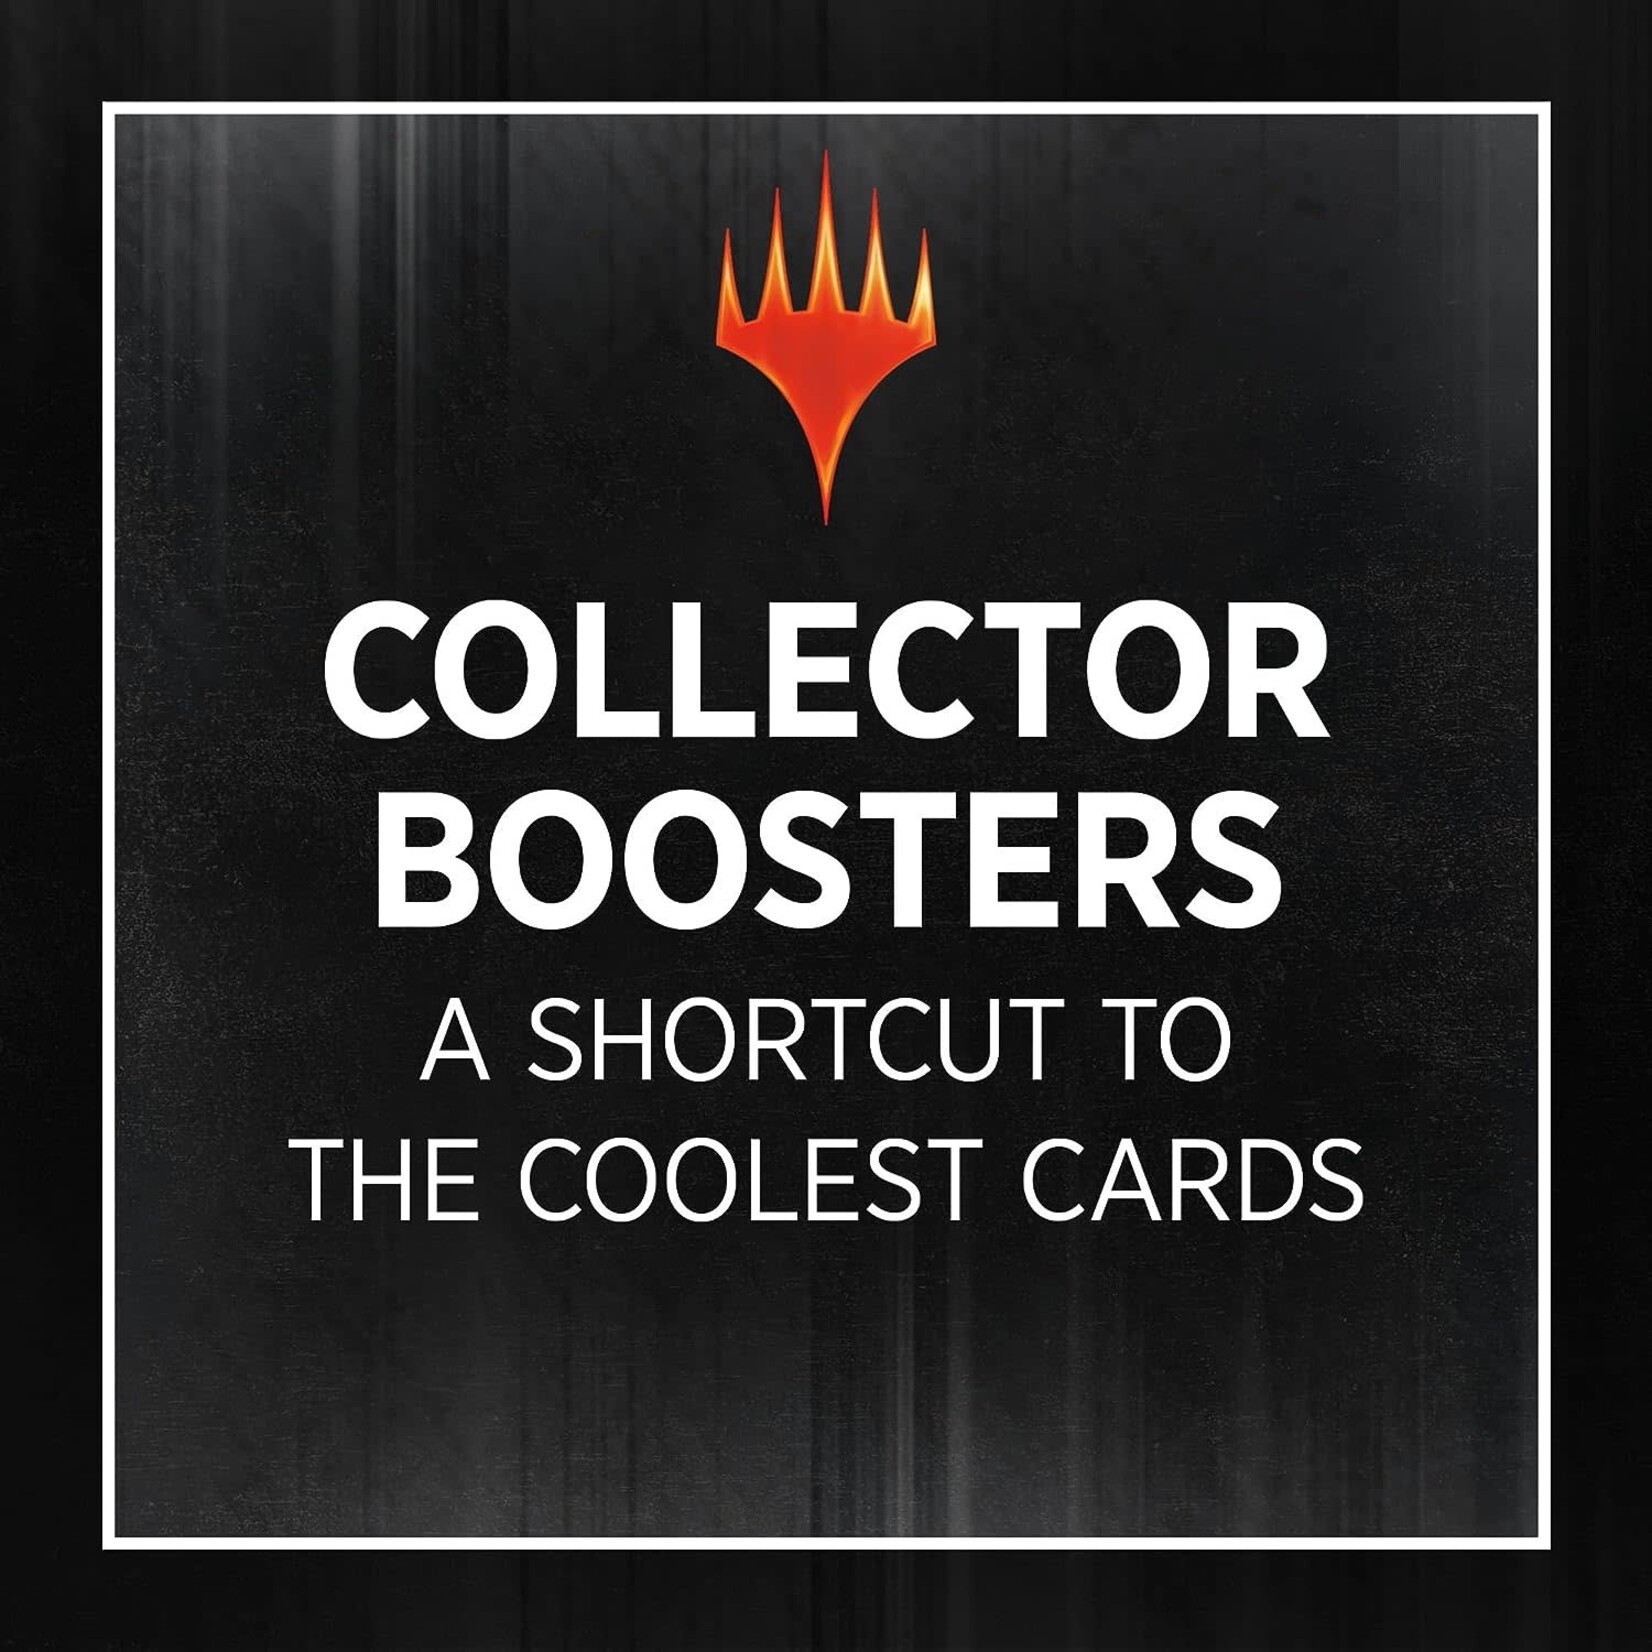 MTG: Lost Caverns of Ixalan Collector's Booster